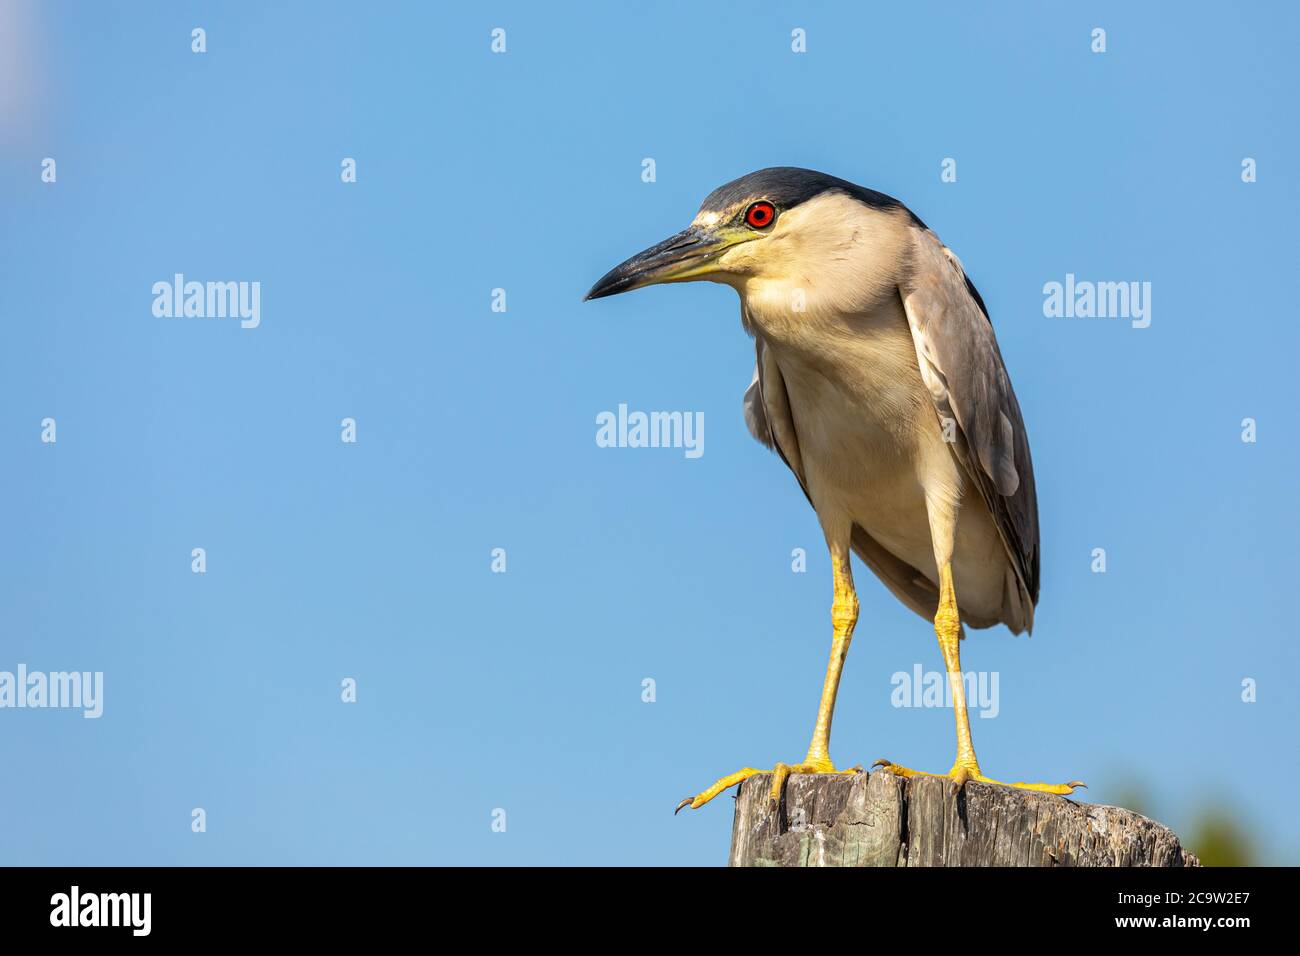 A beautiful adult Black-crowned Night Heron (Nycticorax nycticorax) perches on a dock post, with Florida's Crystal River blurred in the background. Stock Photo